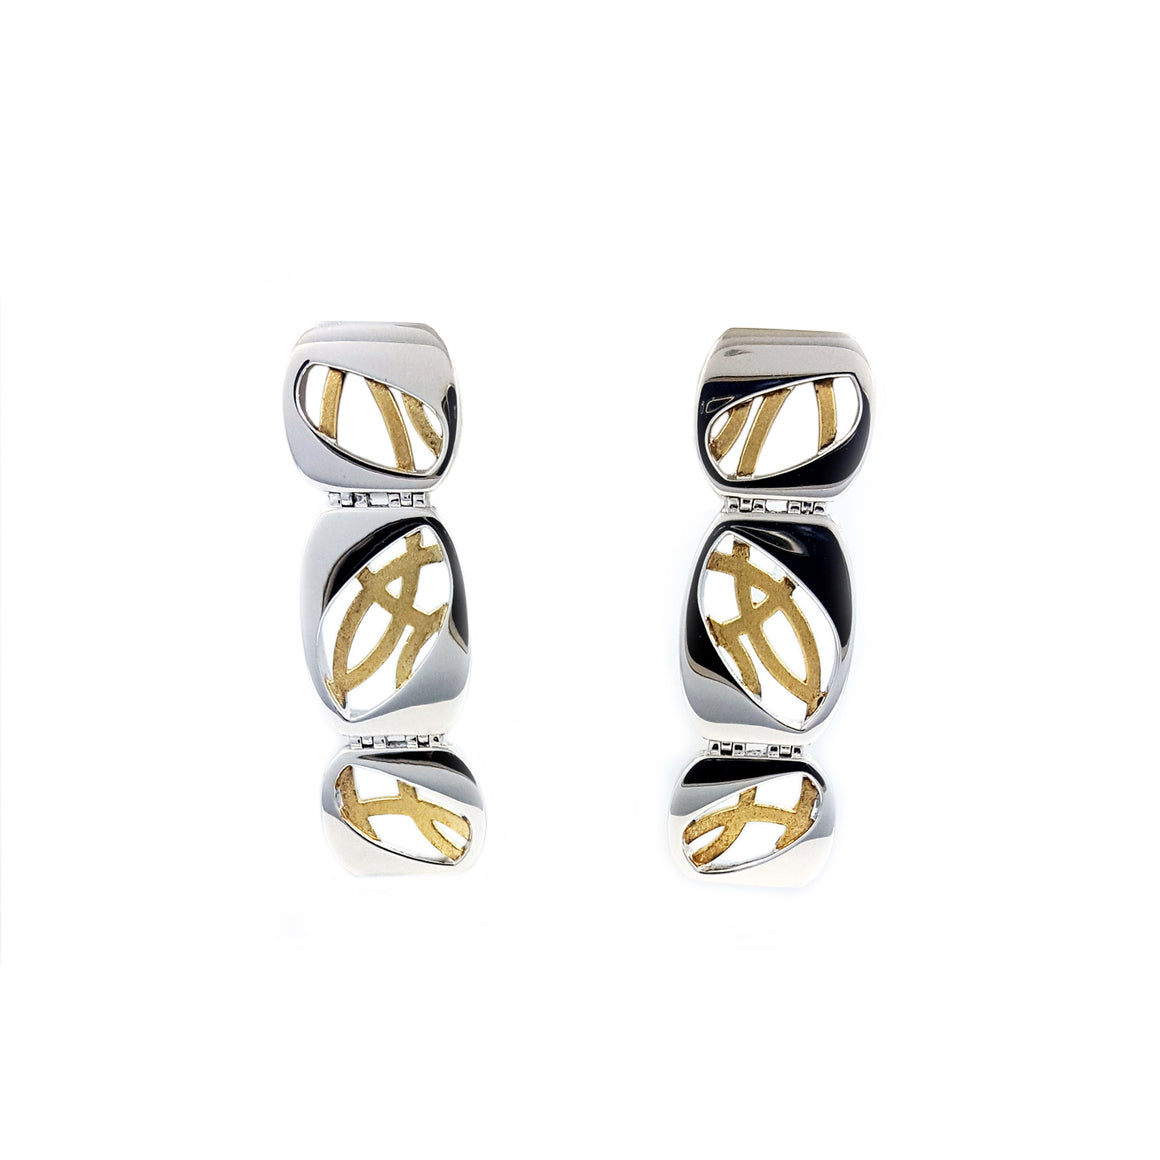 Silver earings with yellow gold